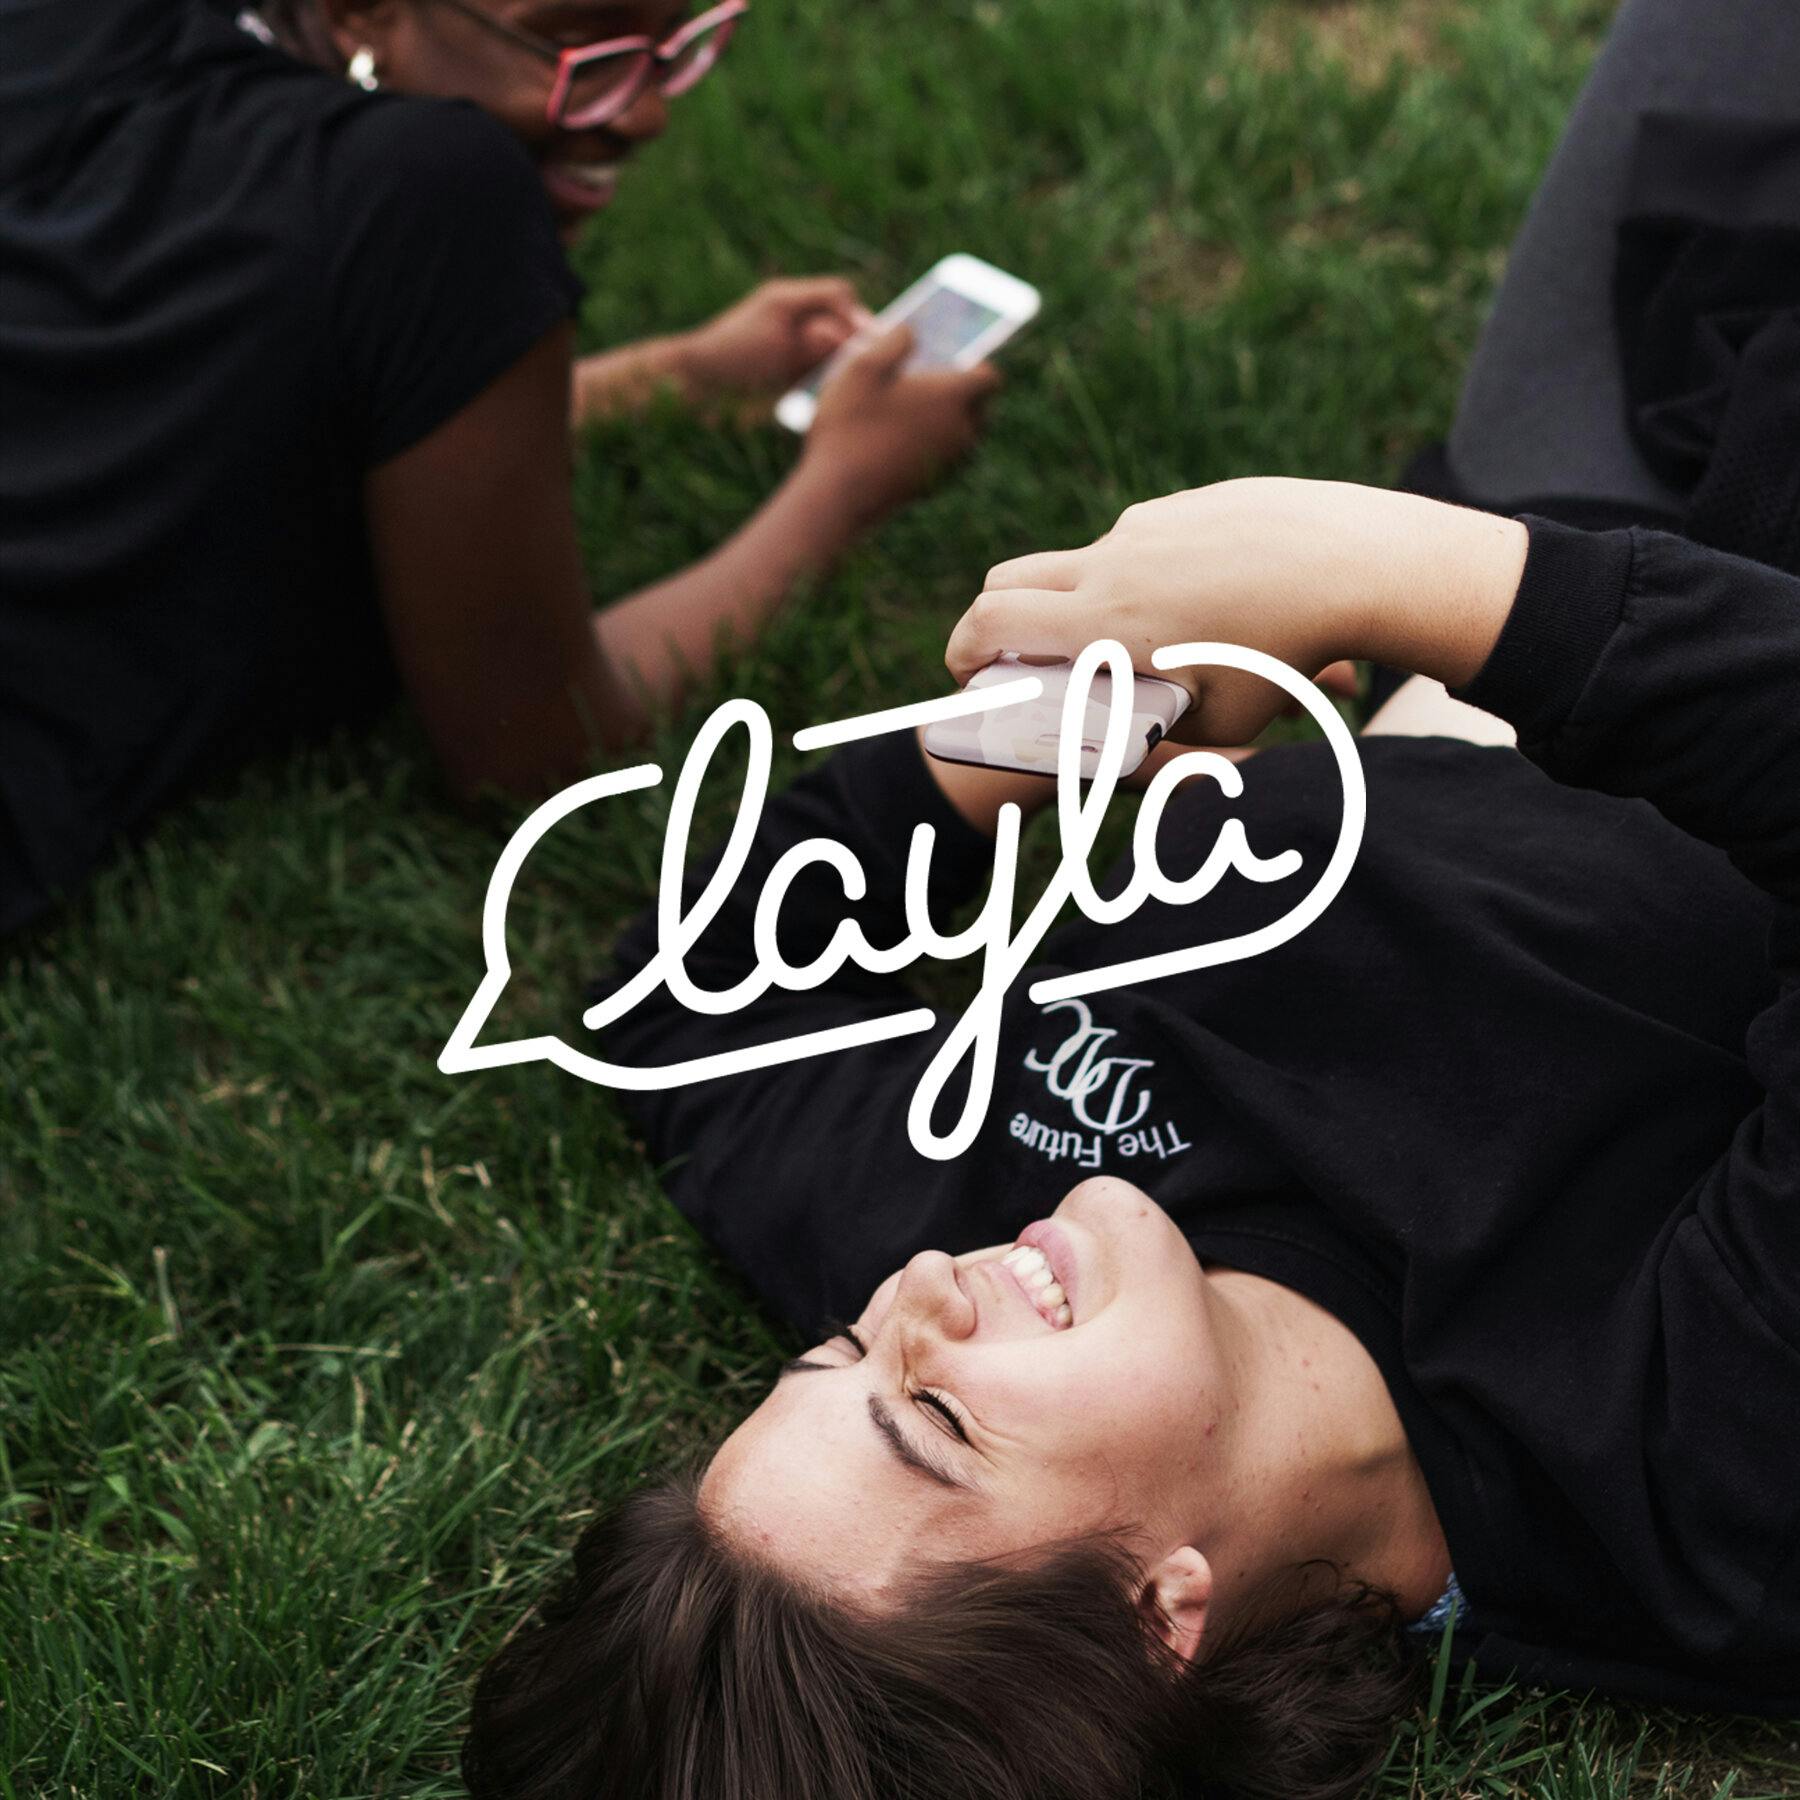 Two ladies laying in the grass with the Layla logo superimposed on the image